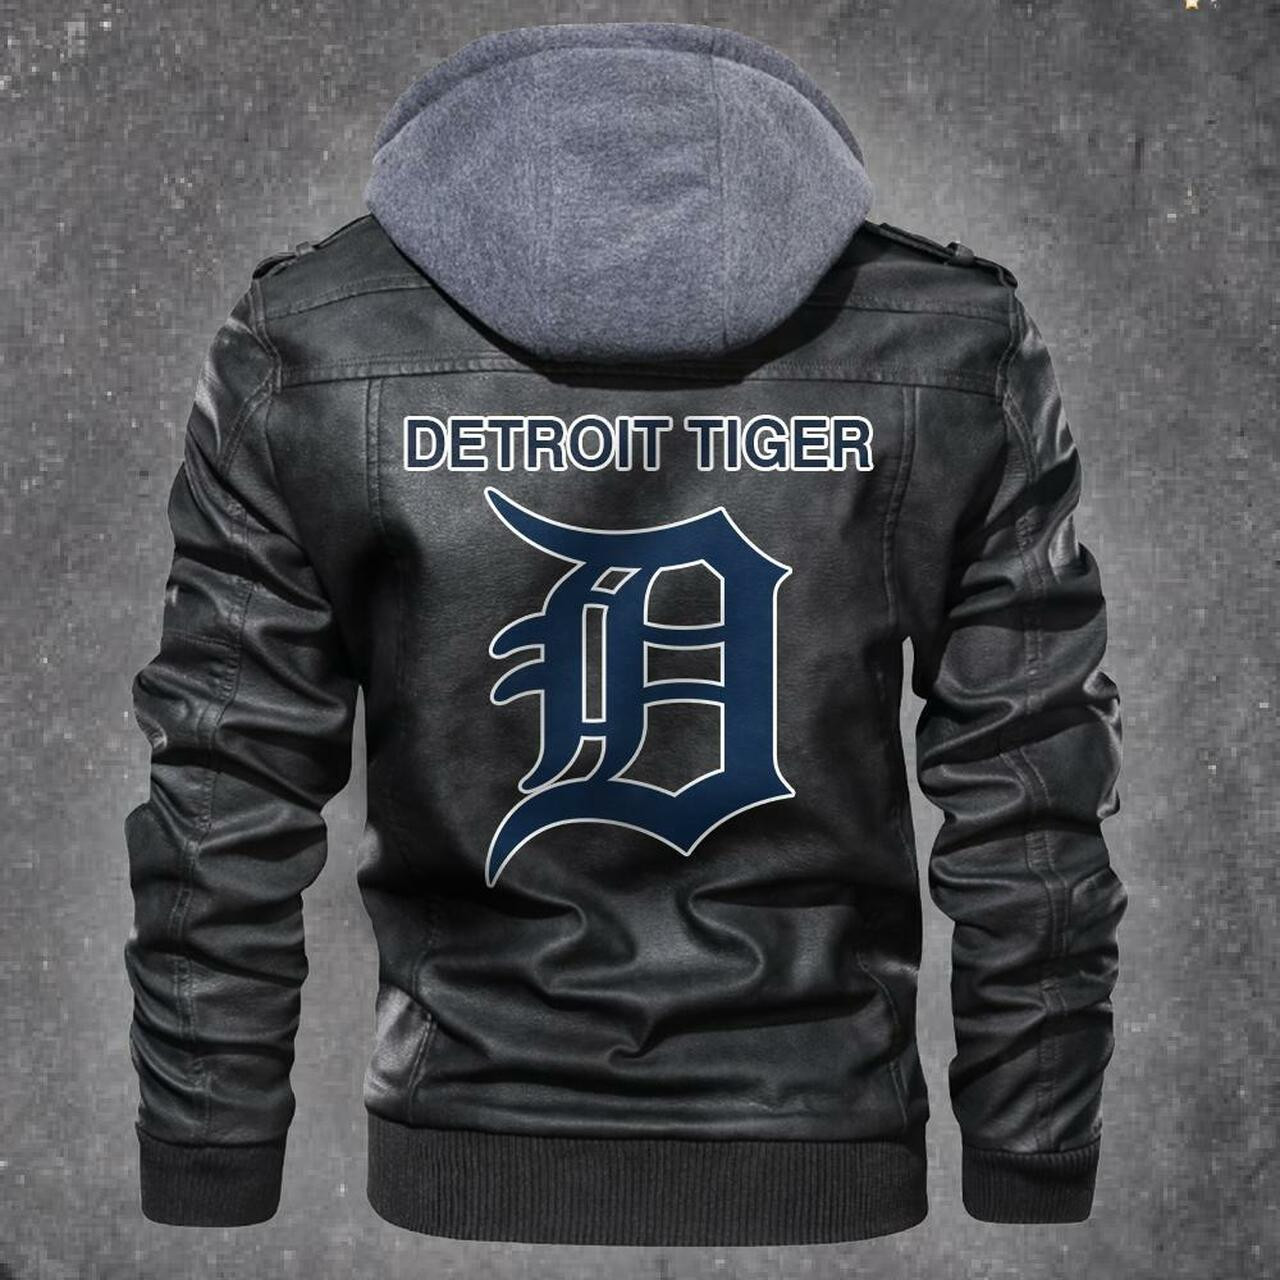 Check out and find the right leather jacket below 399